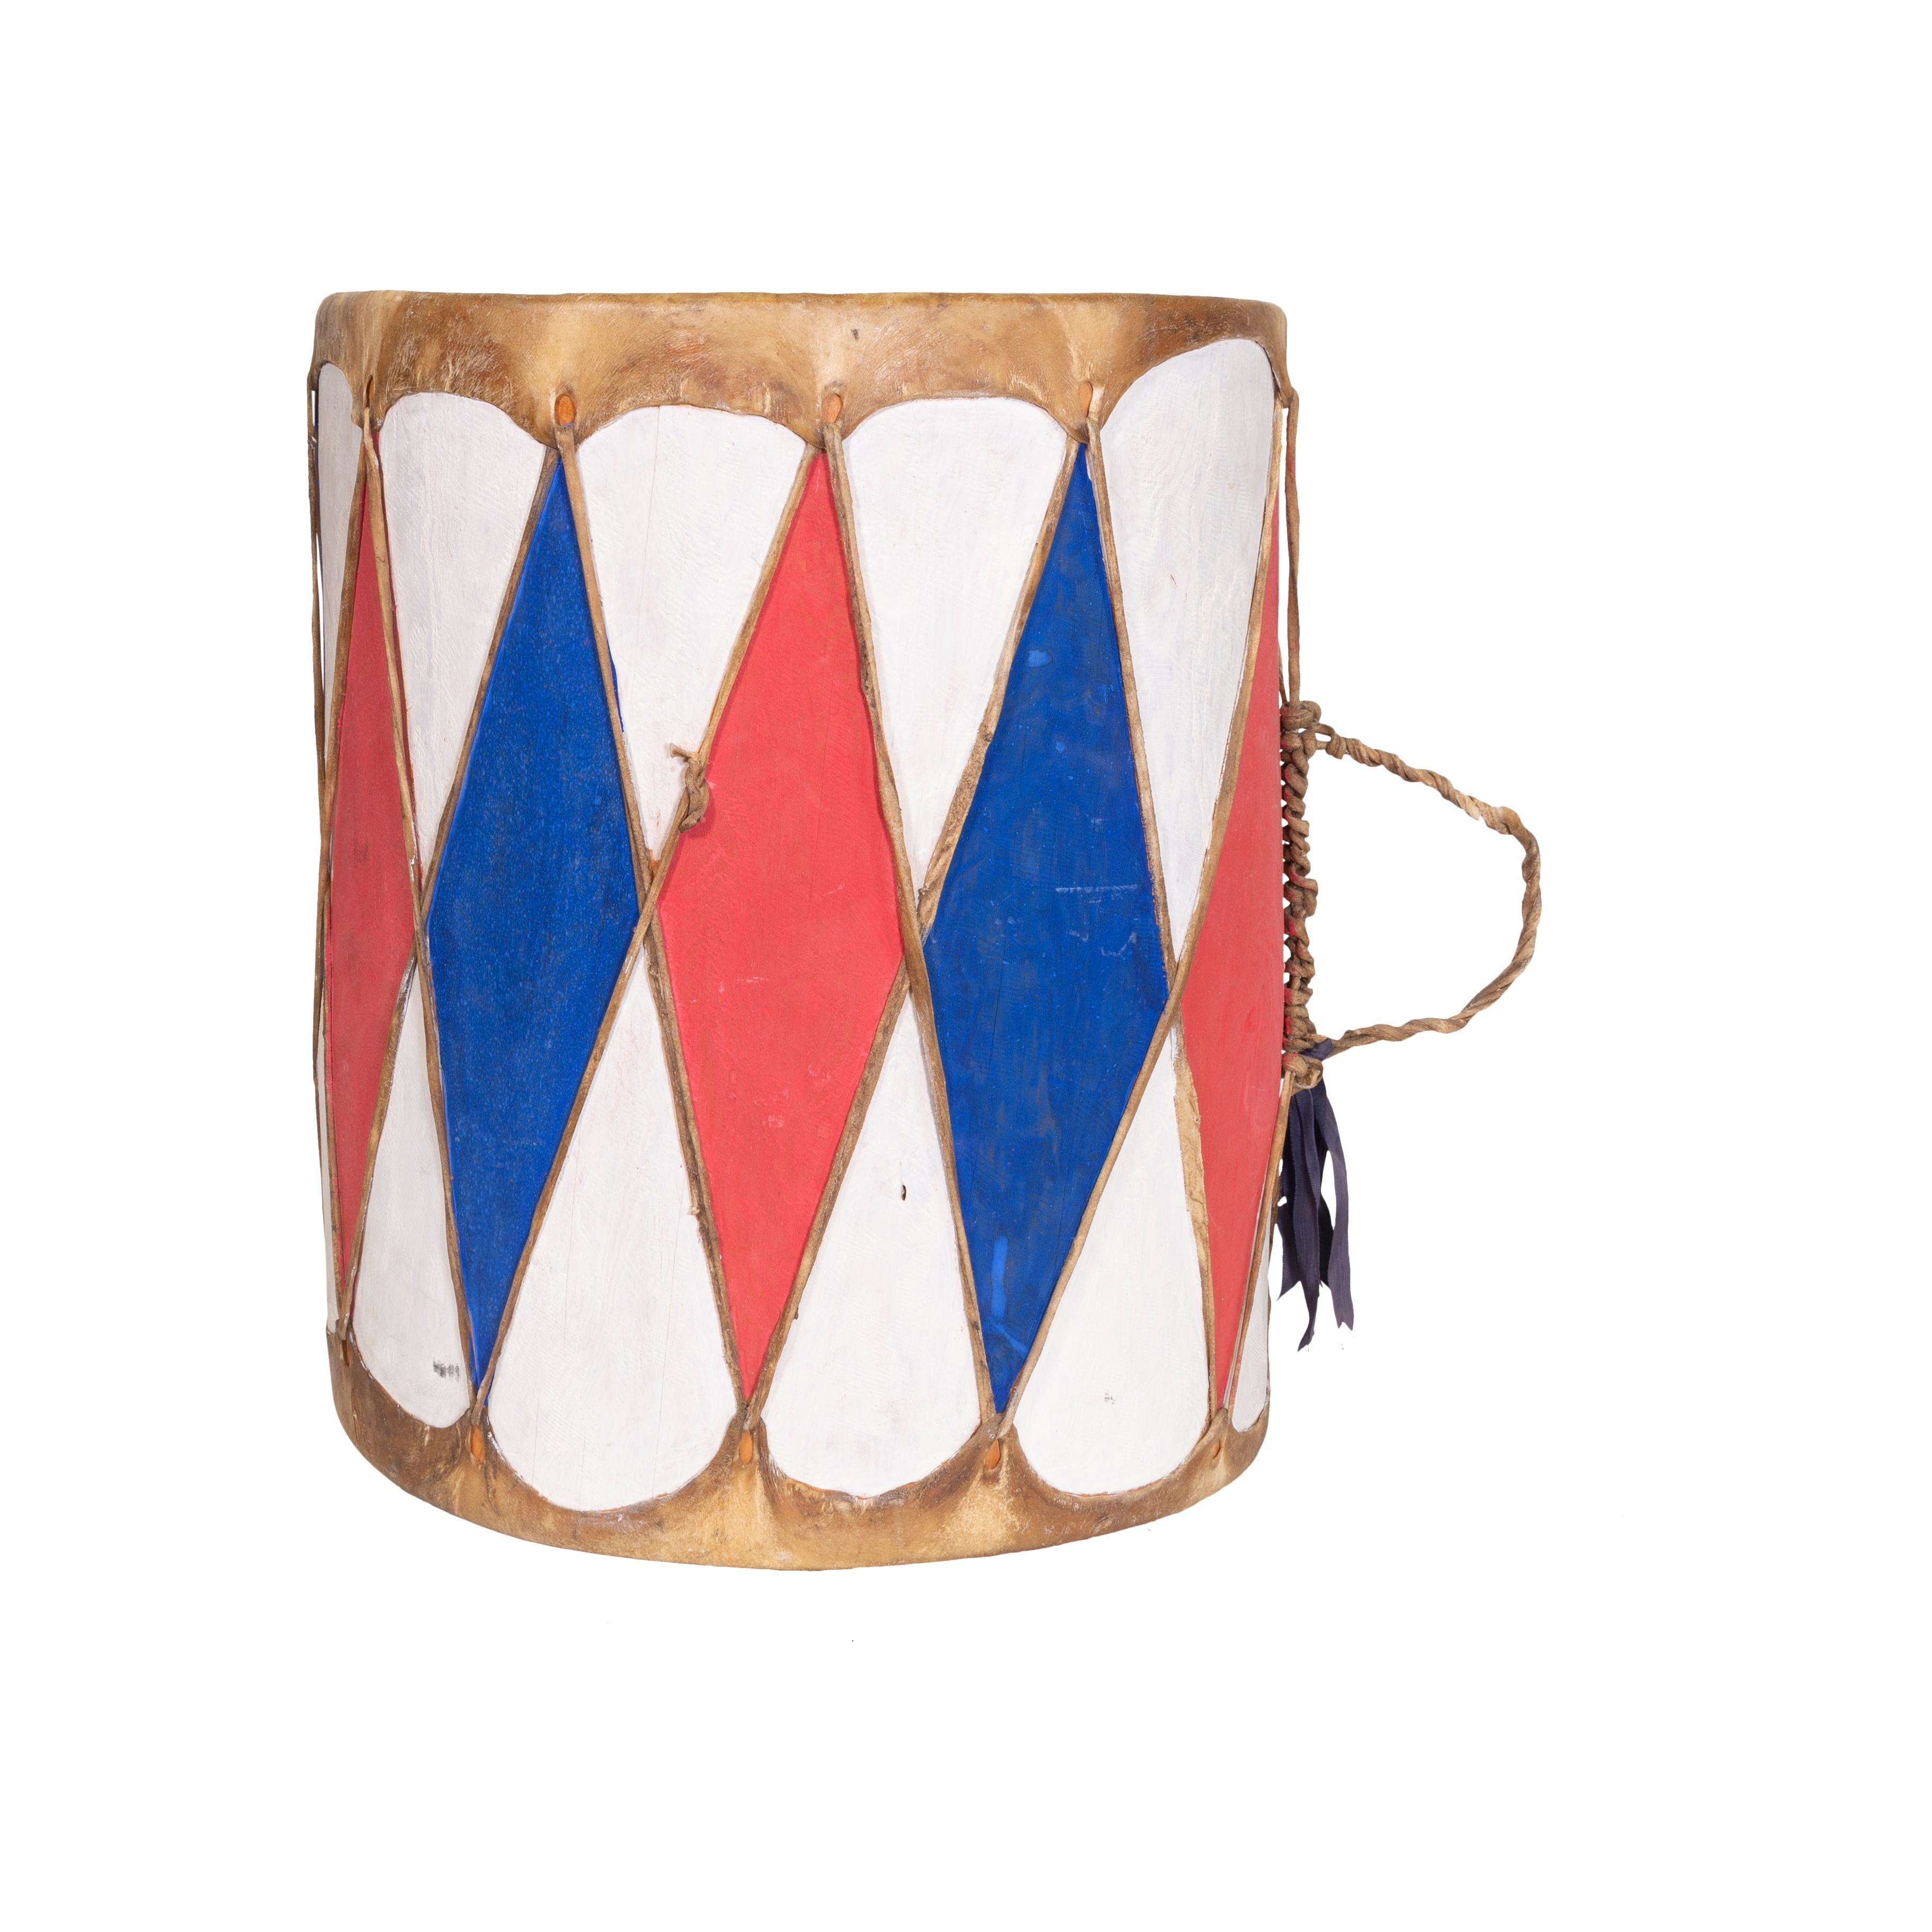 Native American Pueblo Painted Drum In Good Condition For Sale In Coeur d'Alene, ID